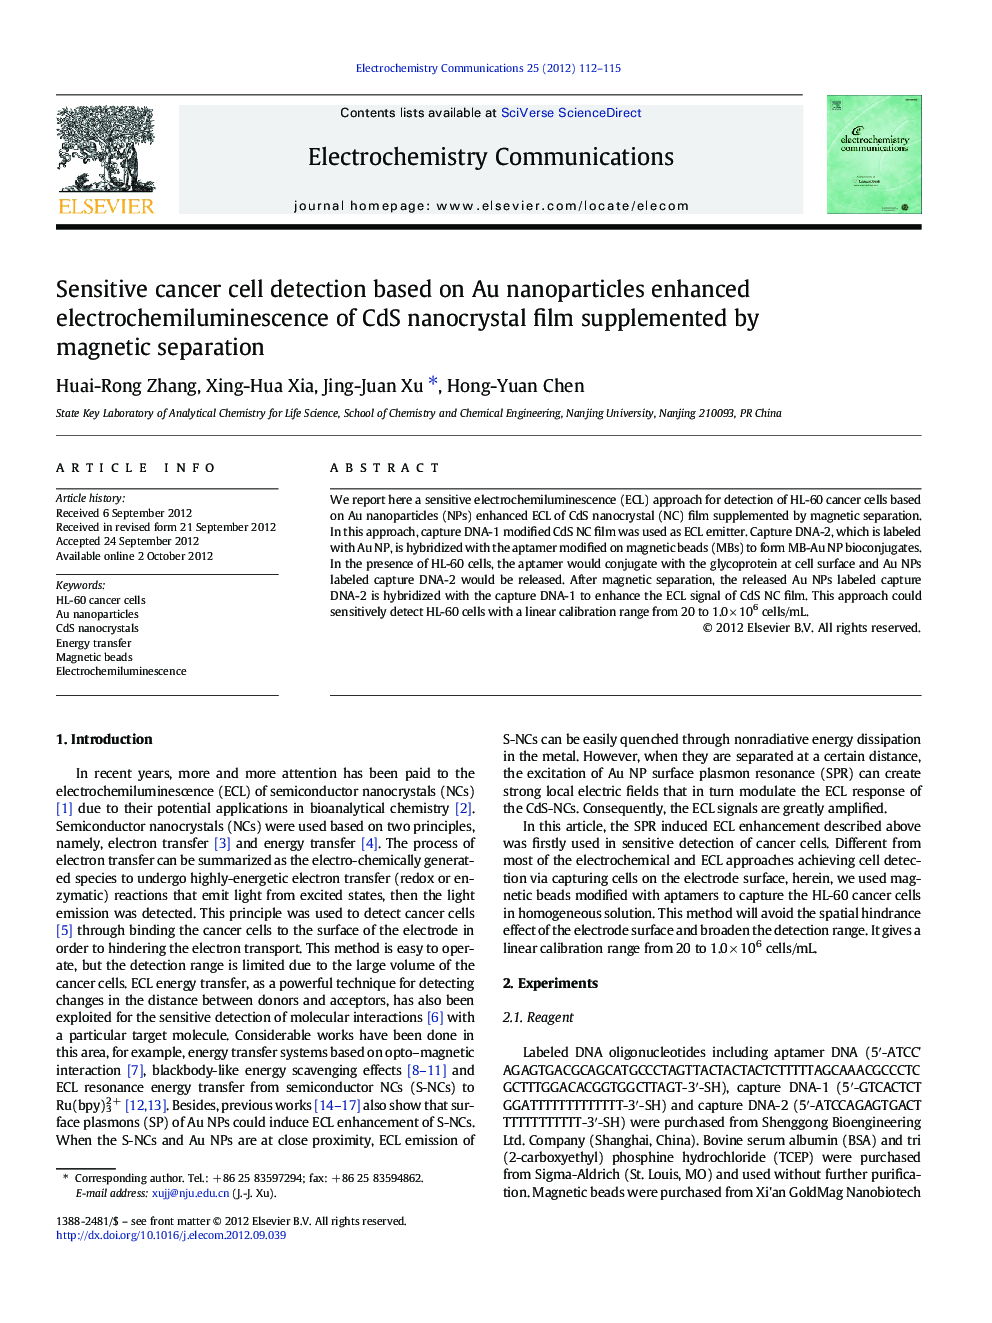 Sensitive cancer cell detection based on Au nanoparticles enhanced electrochemiluminescence of CdS nanocrystal film supplemented by magnetic separation